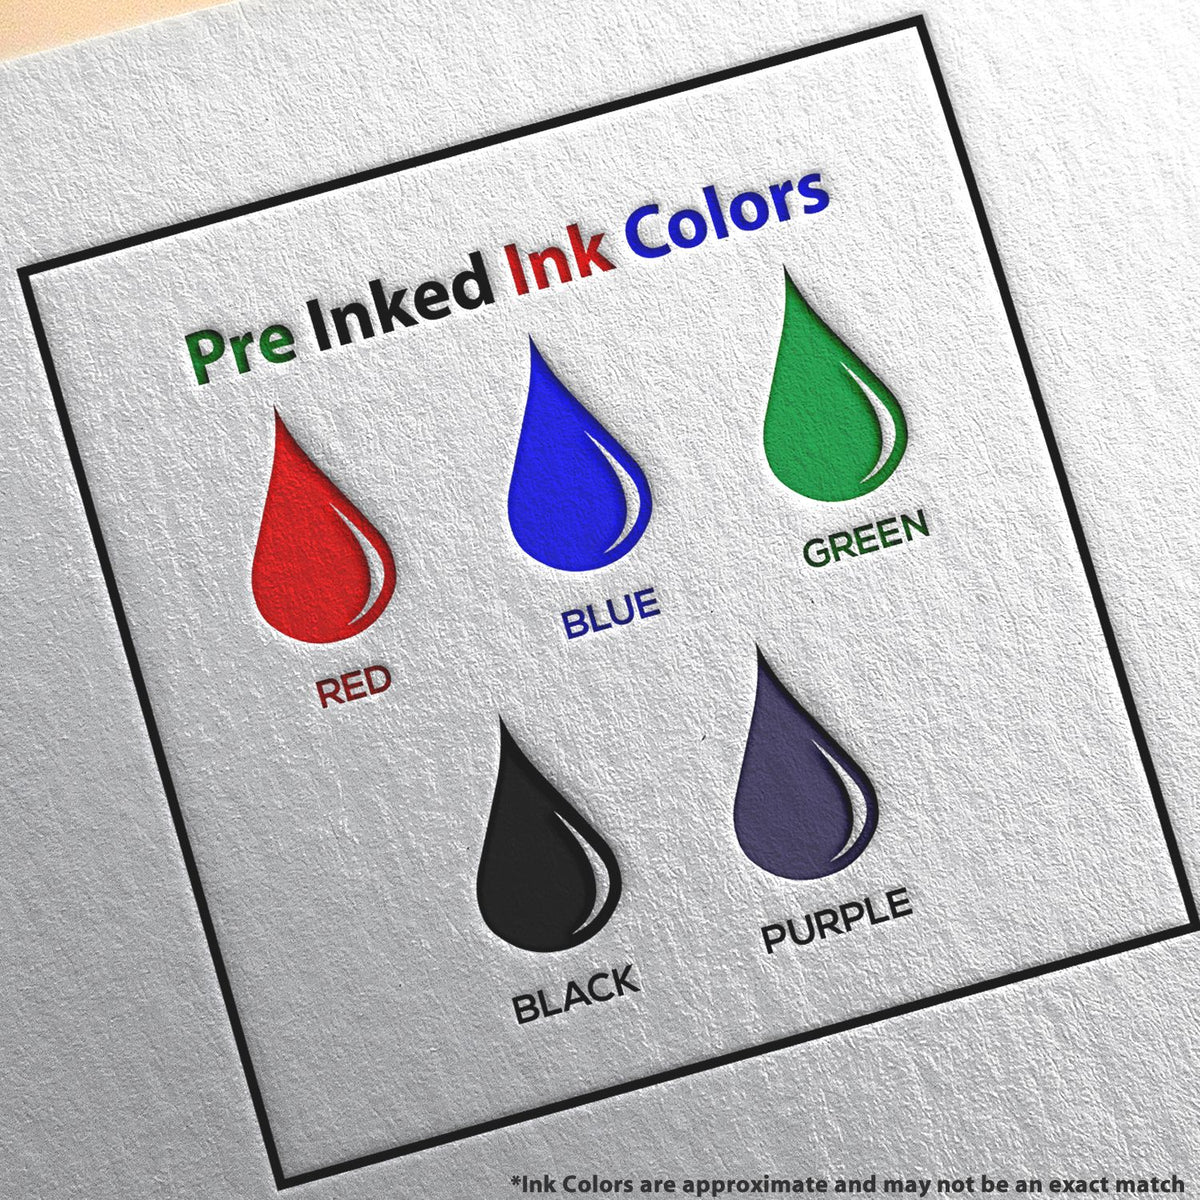 A picture showing the different ink colors or hues available for the Slim Pre-Inked Texas Landscape Architect Seal Stamp product.